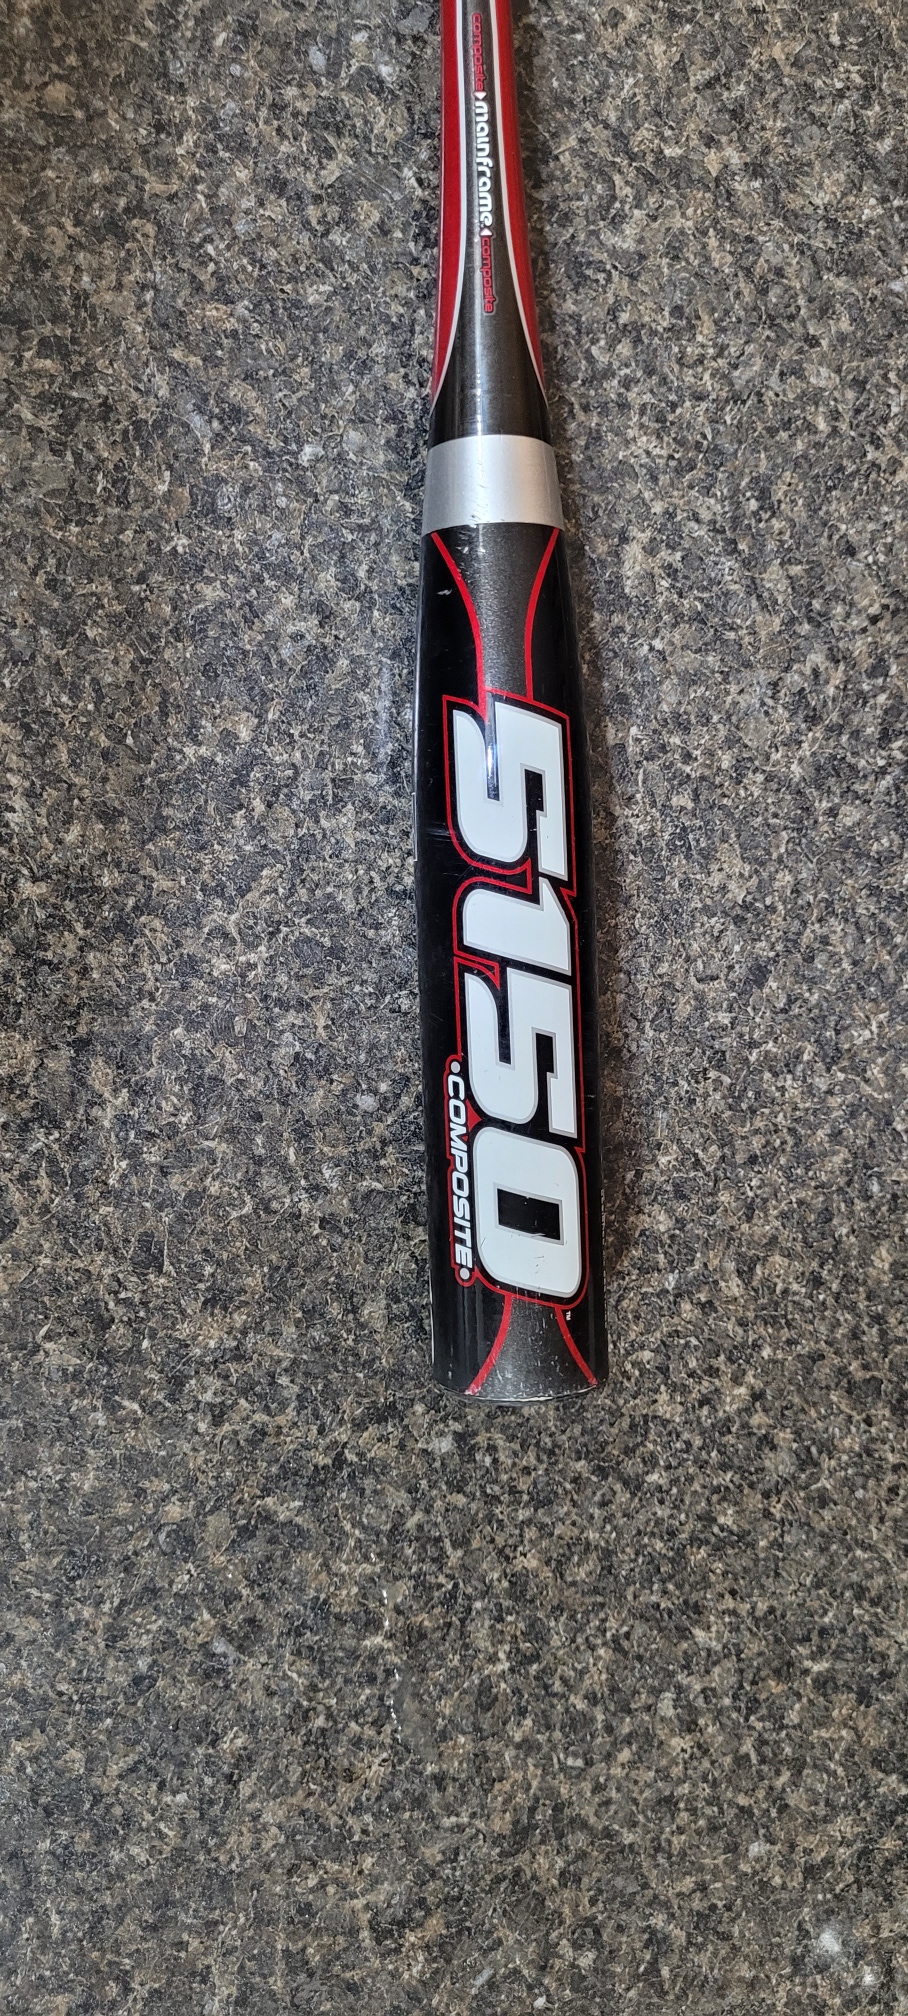 Used USSSA Certified Rawlings Composite 5150 Bat (-12) 18 oz 30"